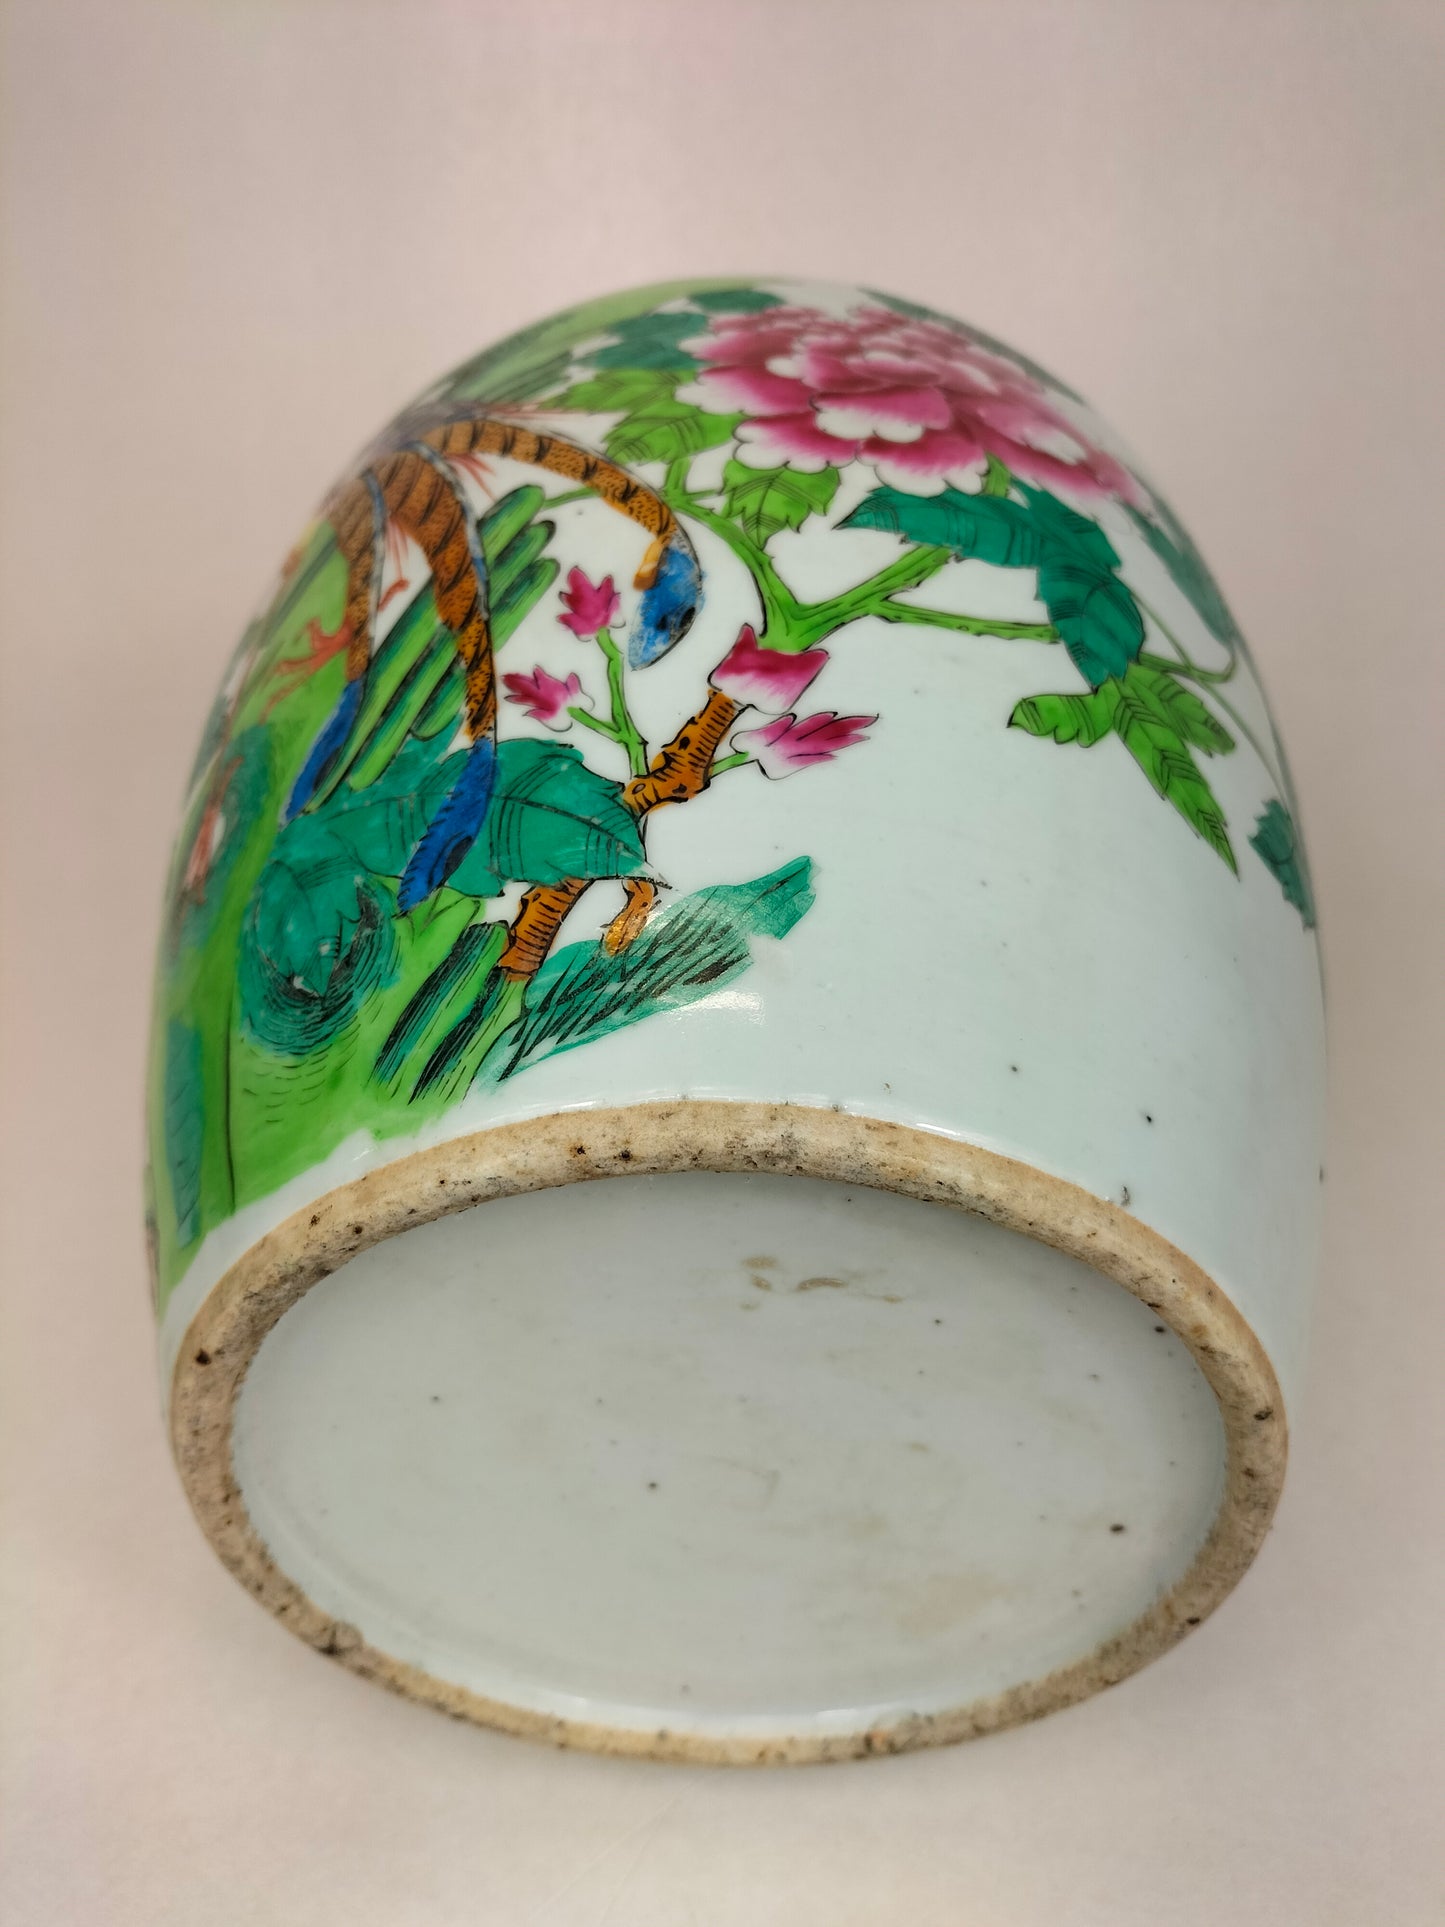 Antique Chinese ginger jar decorated with phoenix and peonies // Republic Period (1912-1949)